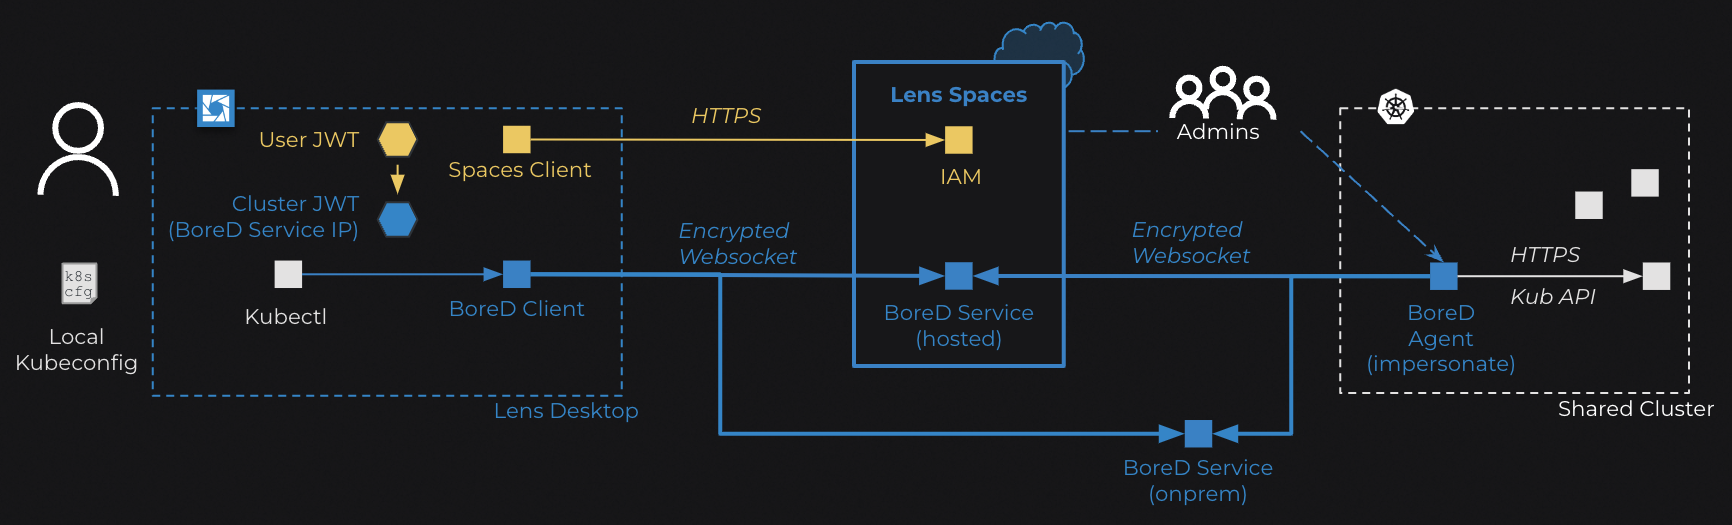 Cluster Connect Architecture